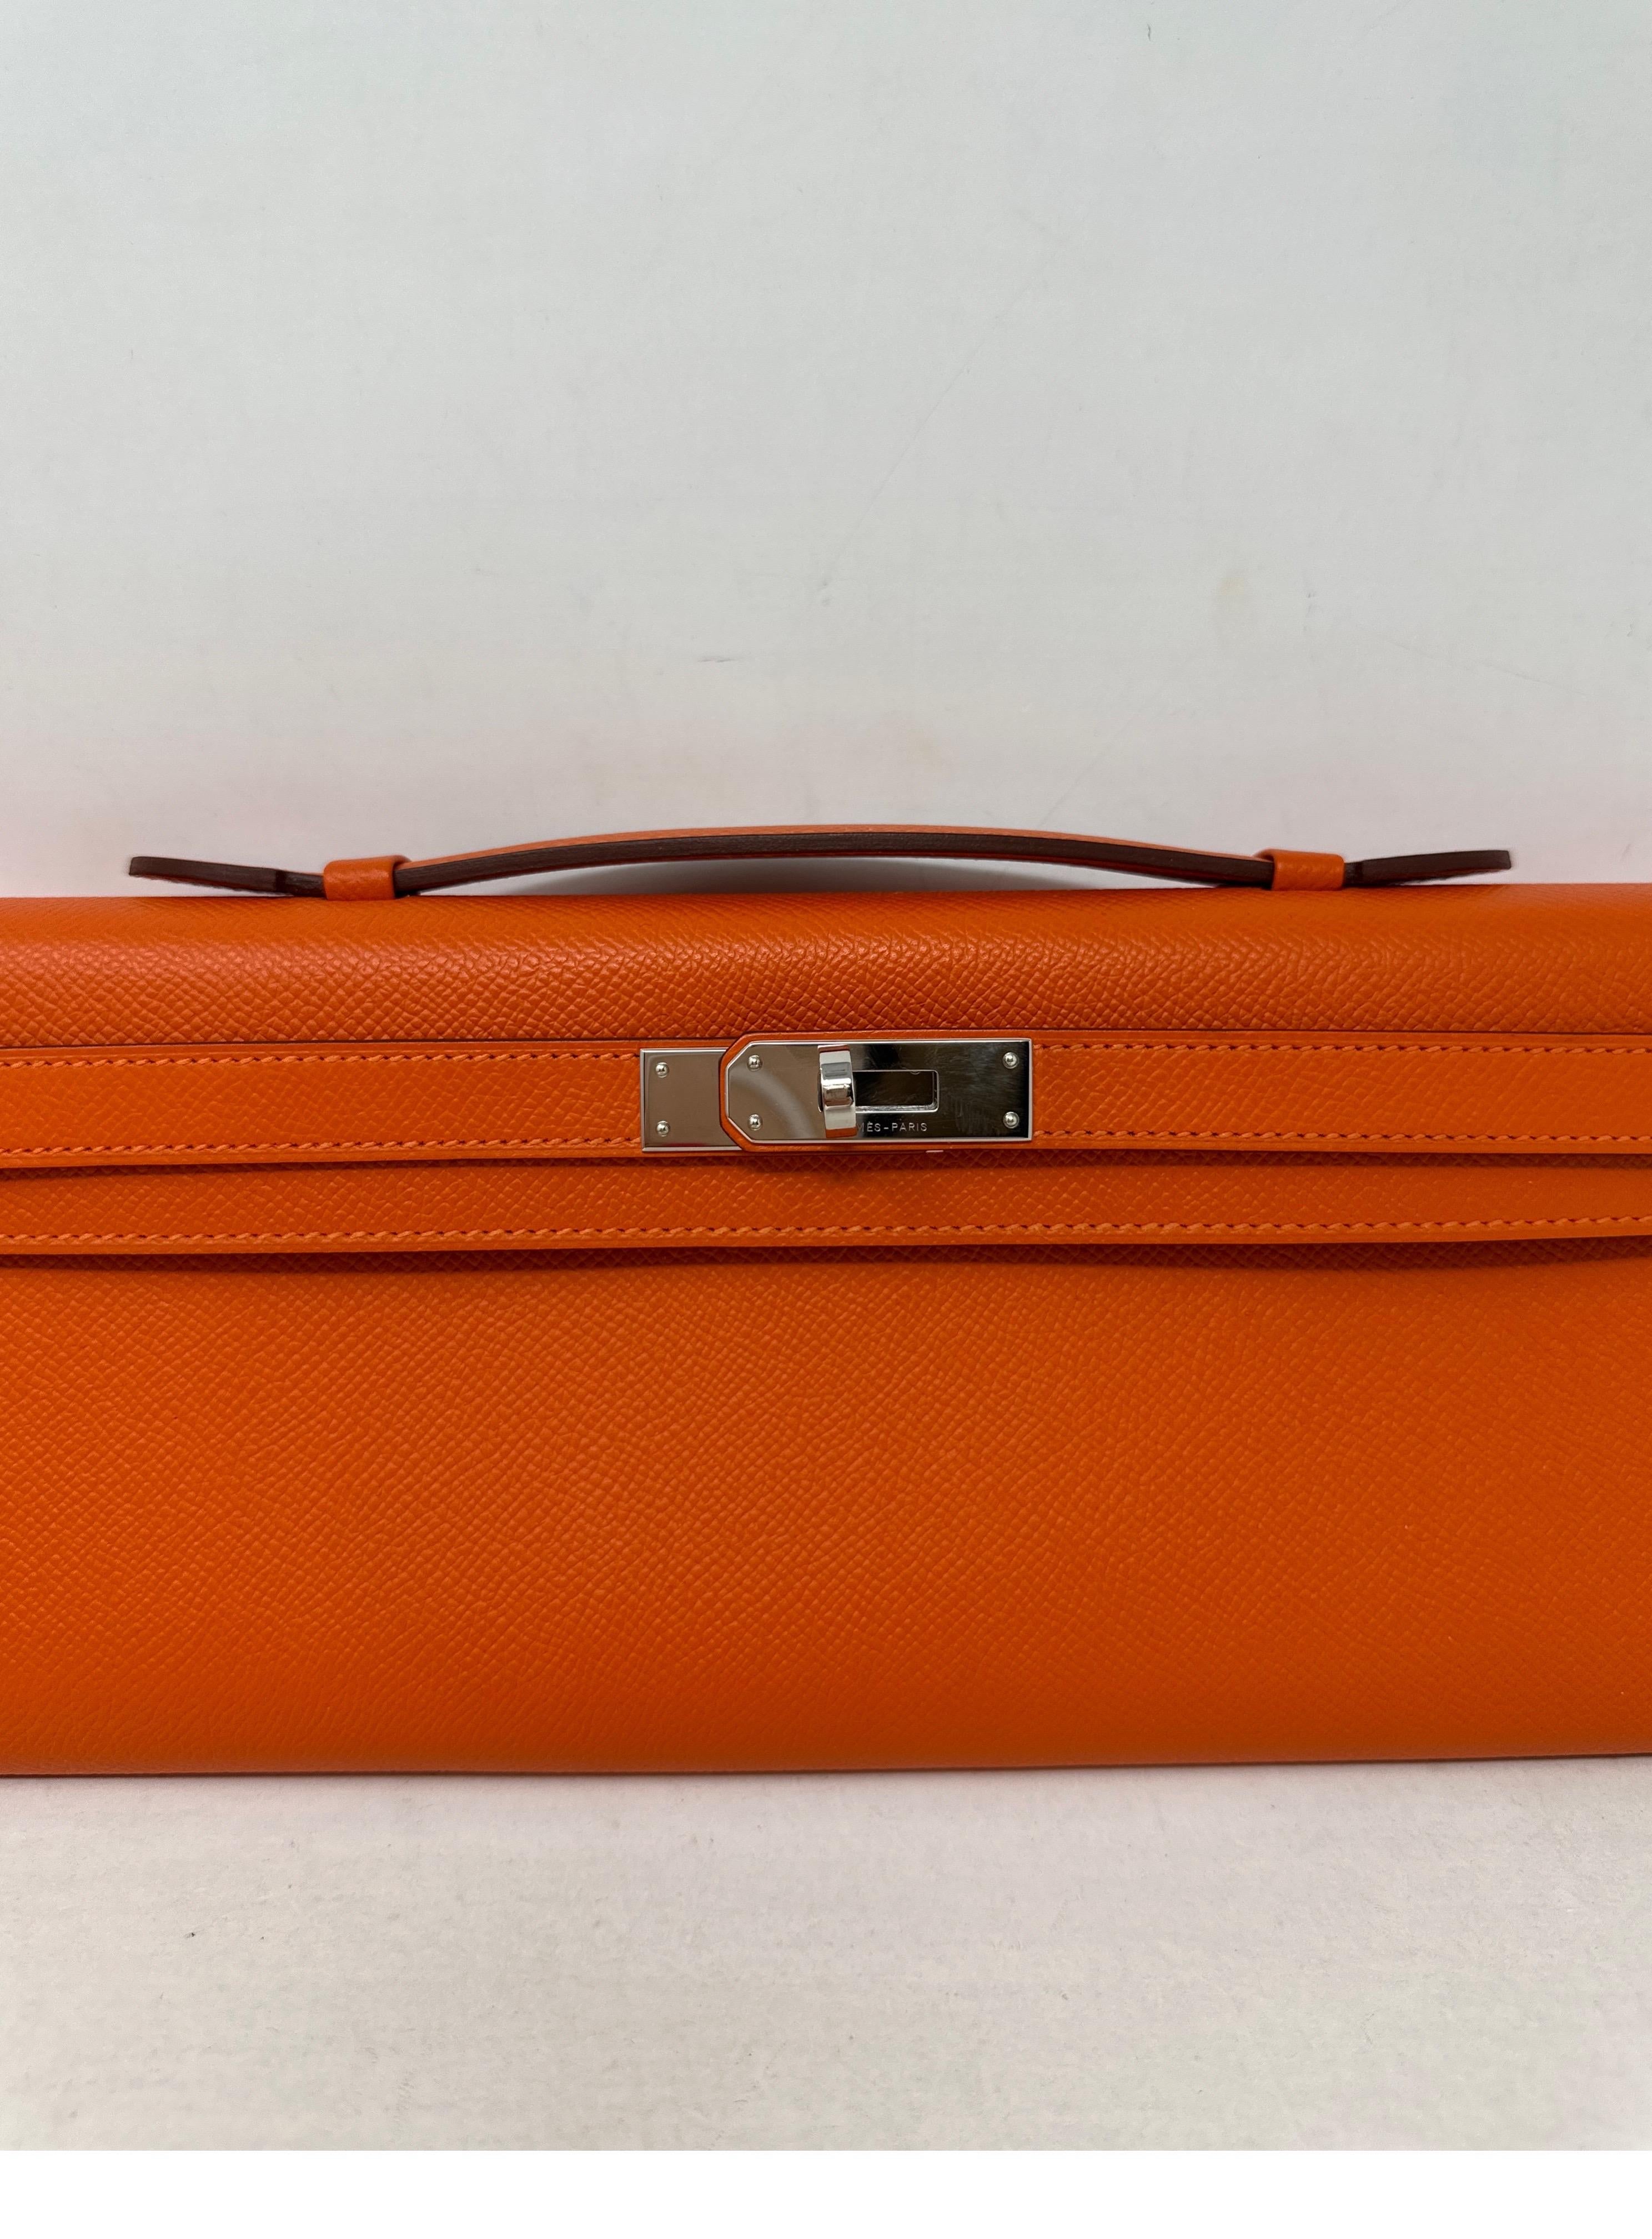 Hermes Orange Kelly Clutch Bag. Epsom leather. Excellent condition. Looks like new. Palladium silver hardware. Interior clean. Retired Kelly clutch. Includes dust bag and box. Guaranteed authentic. 